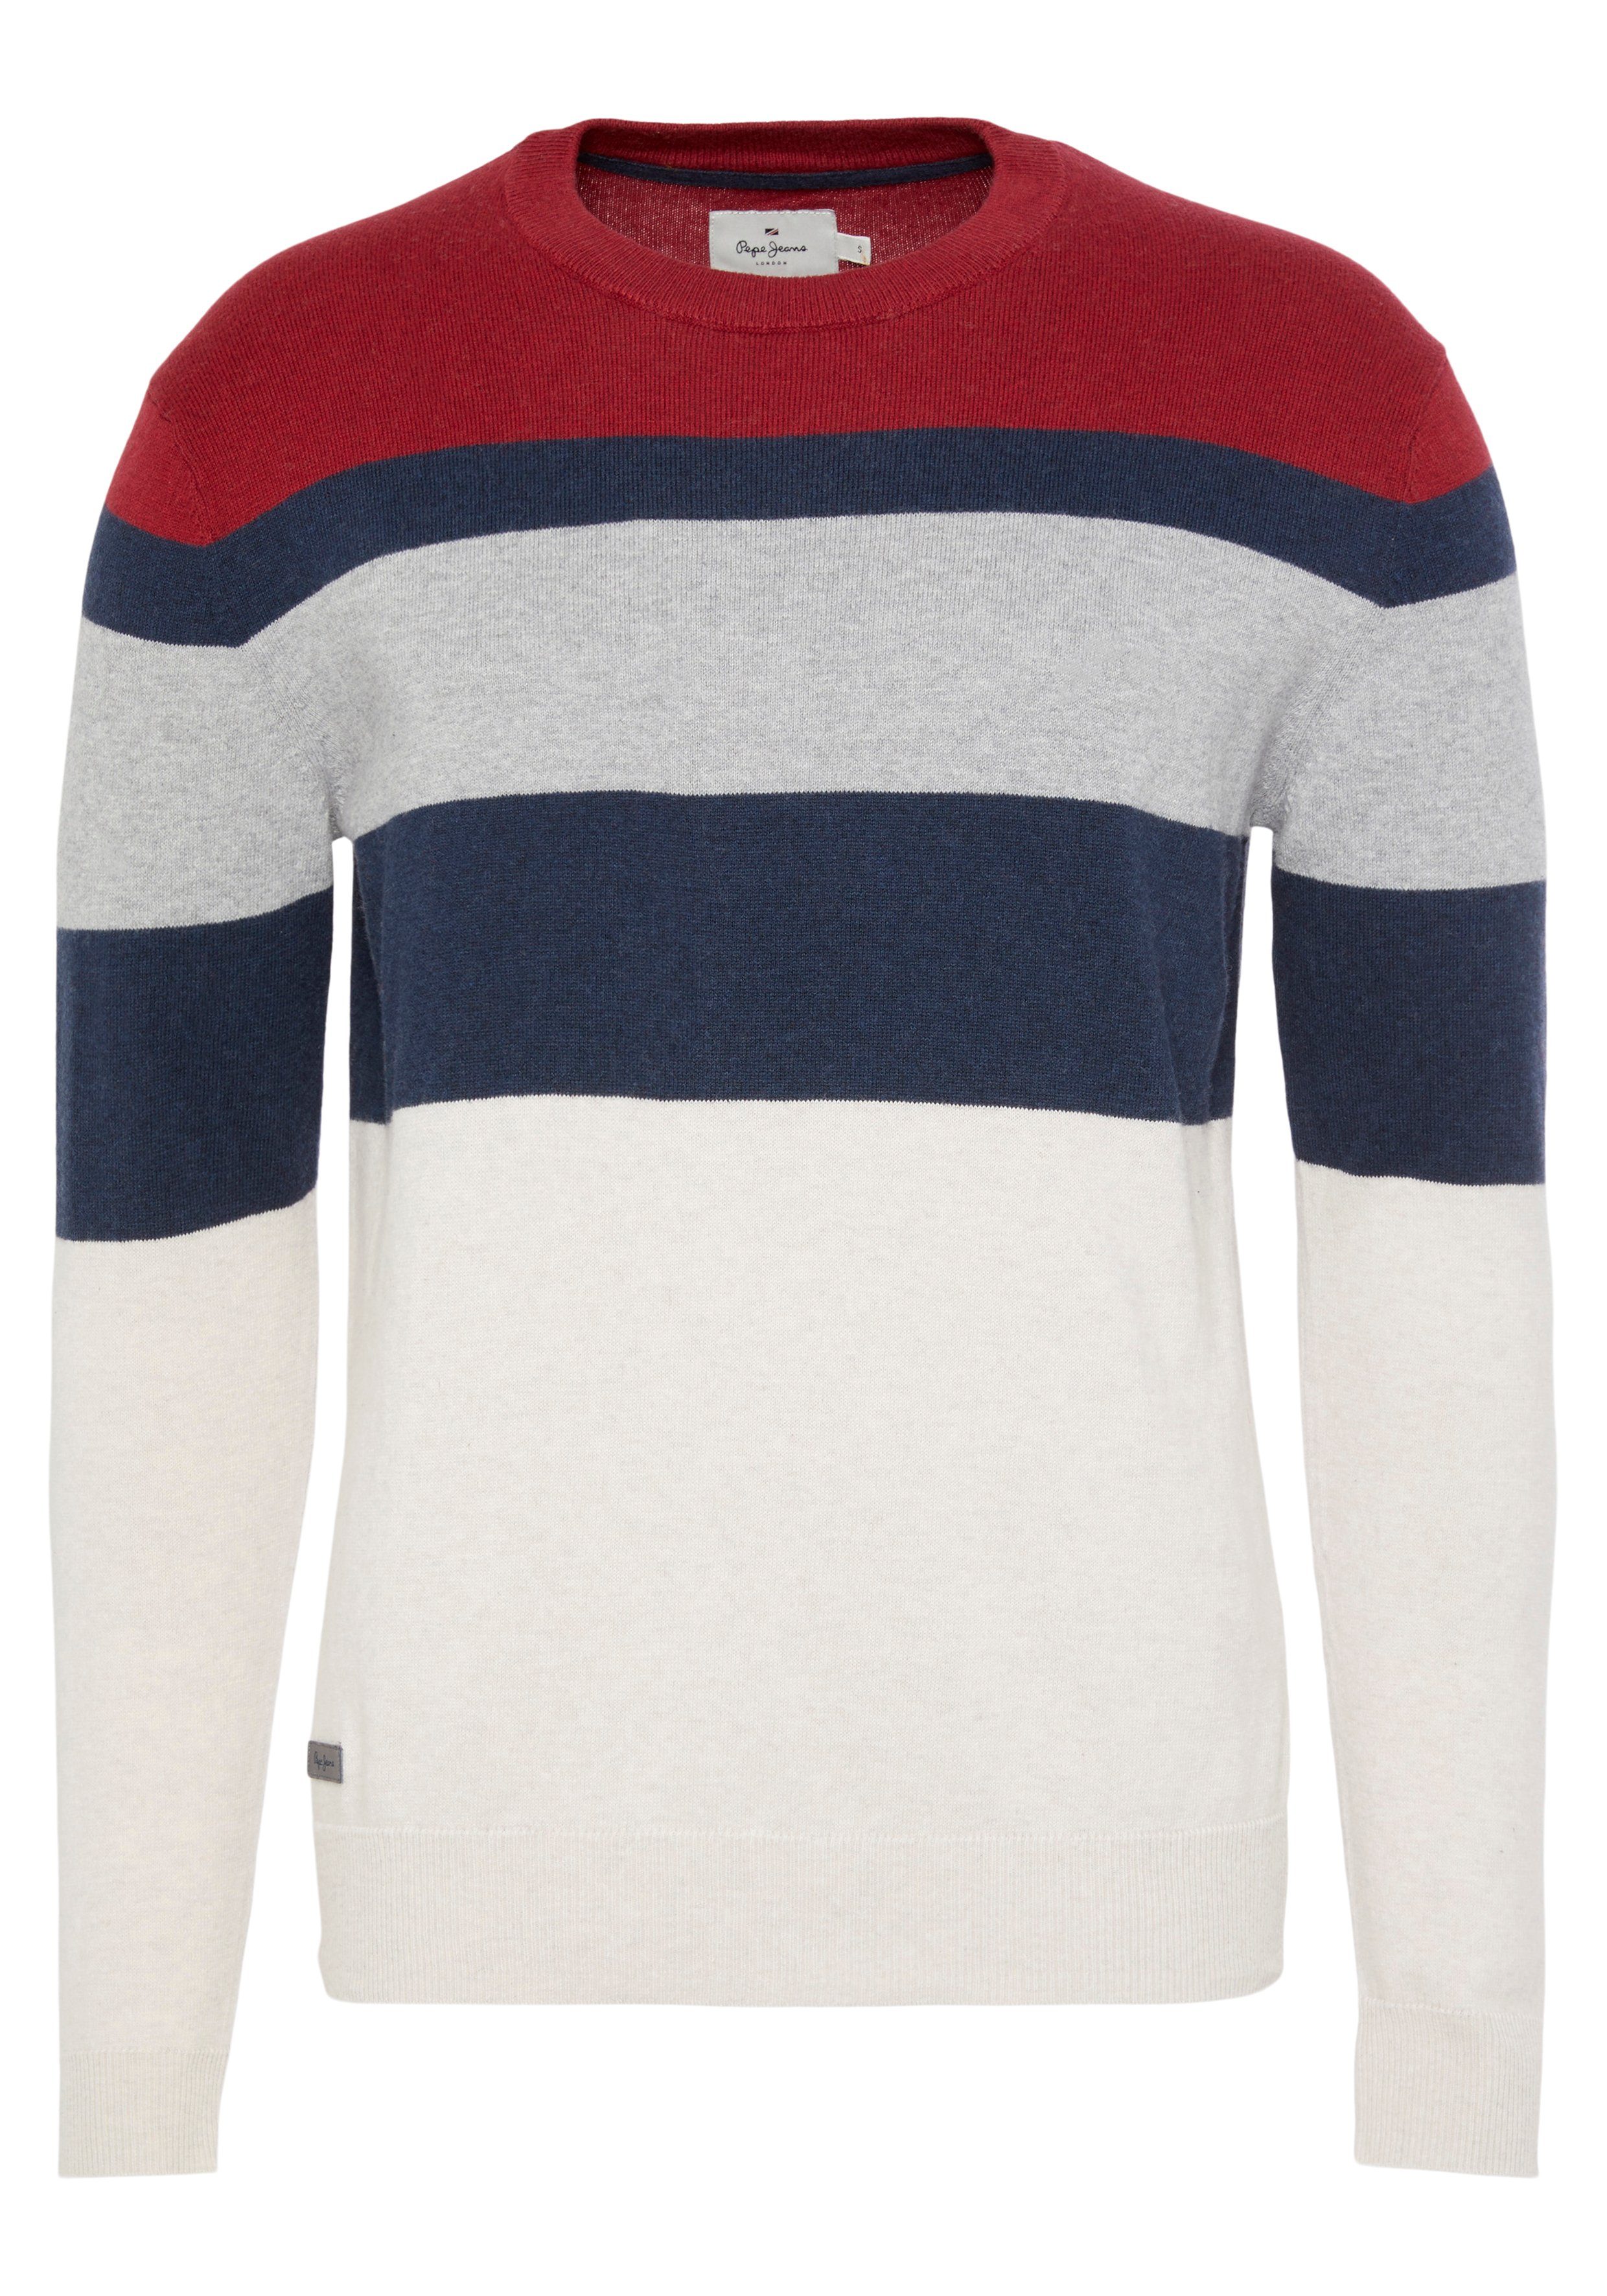 Pepe Jeans Strickpullover